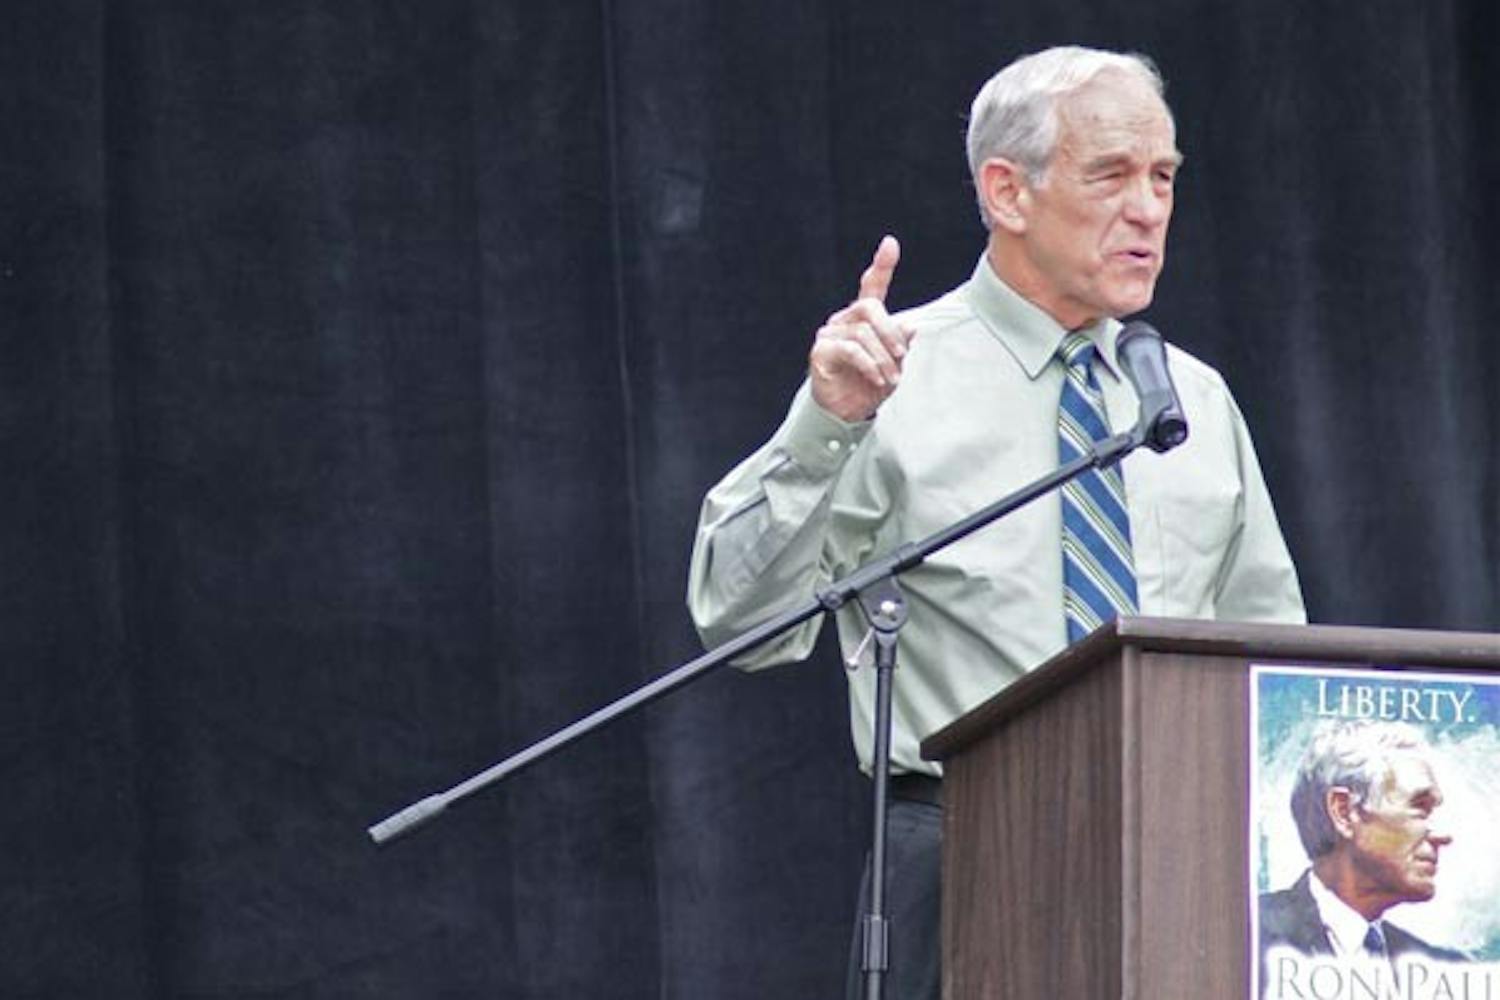 REVOLUTION: Ron Paul speaks to students about his “Campaign for Liberty” on Hayden Mall on Friday. (Rosie Gochnour)